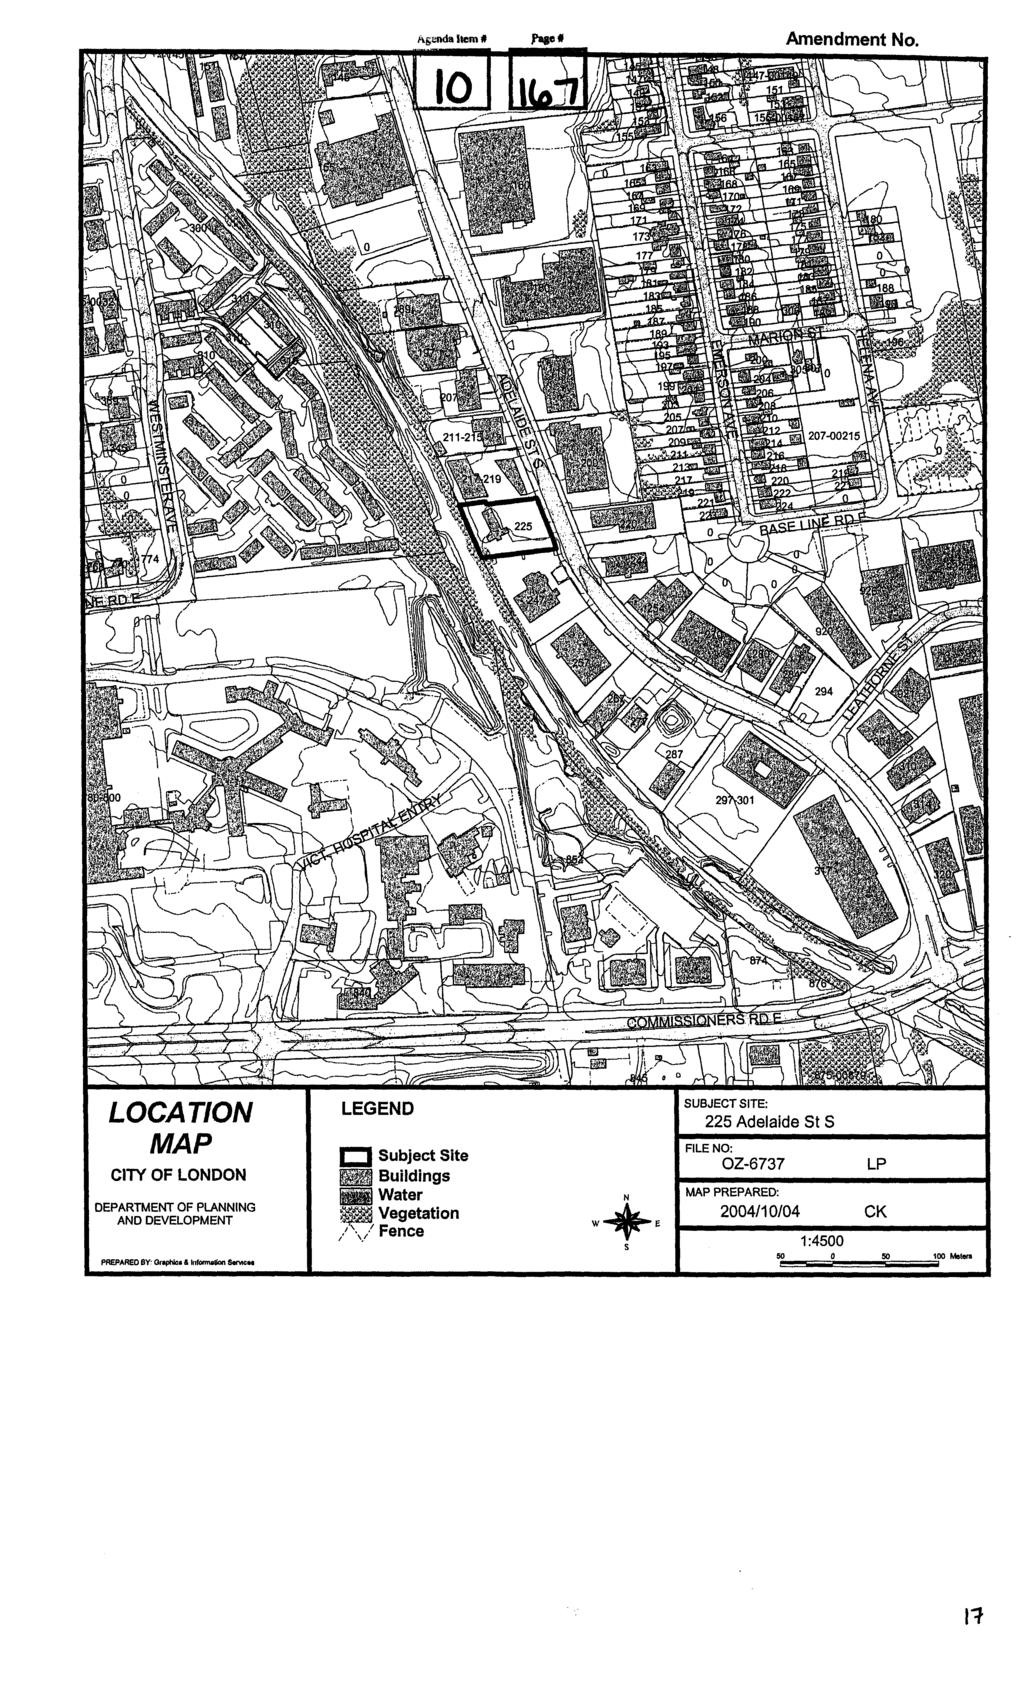 LOCATION MAP CITY OF LONDON DEPARTMENT OF PLANNING AND DEVELOPMENT LEGEND 0 Subject Site Buildings Water %@I Vegetation,:$:,!